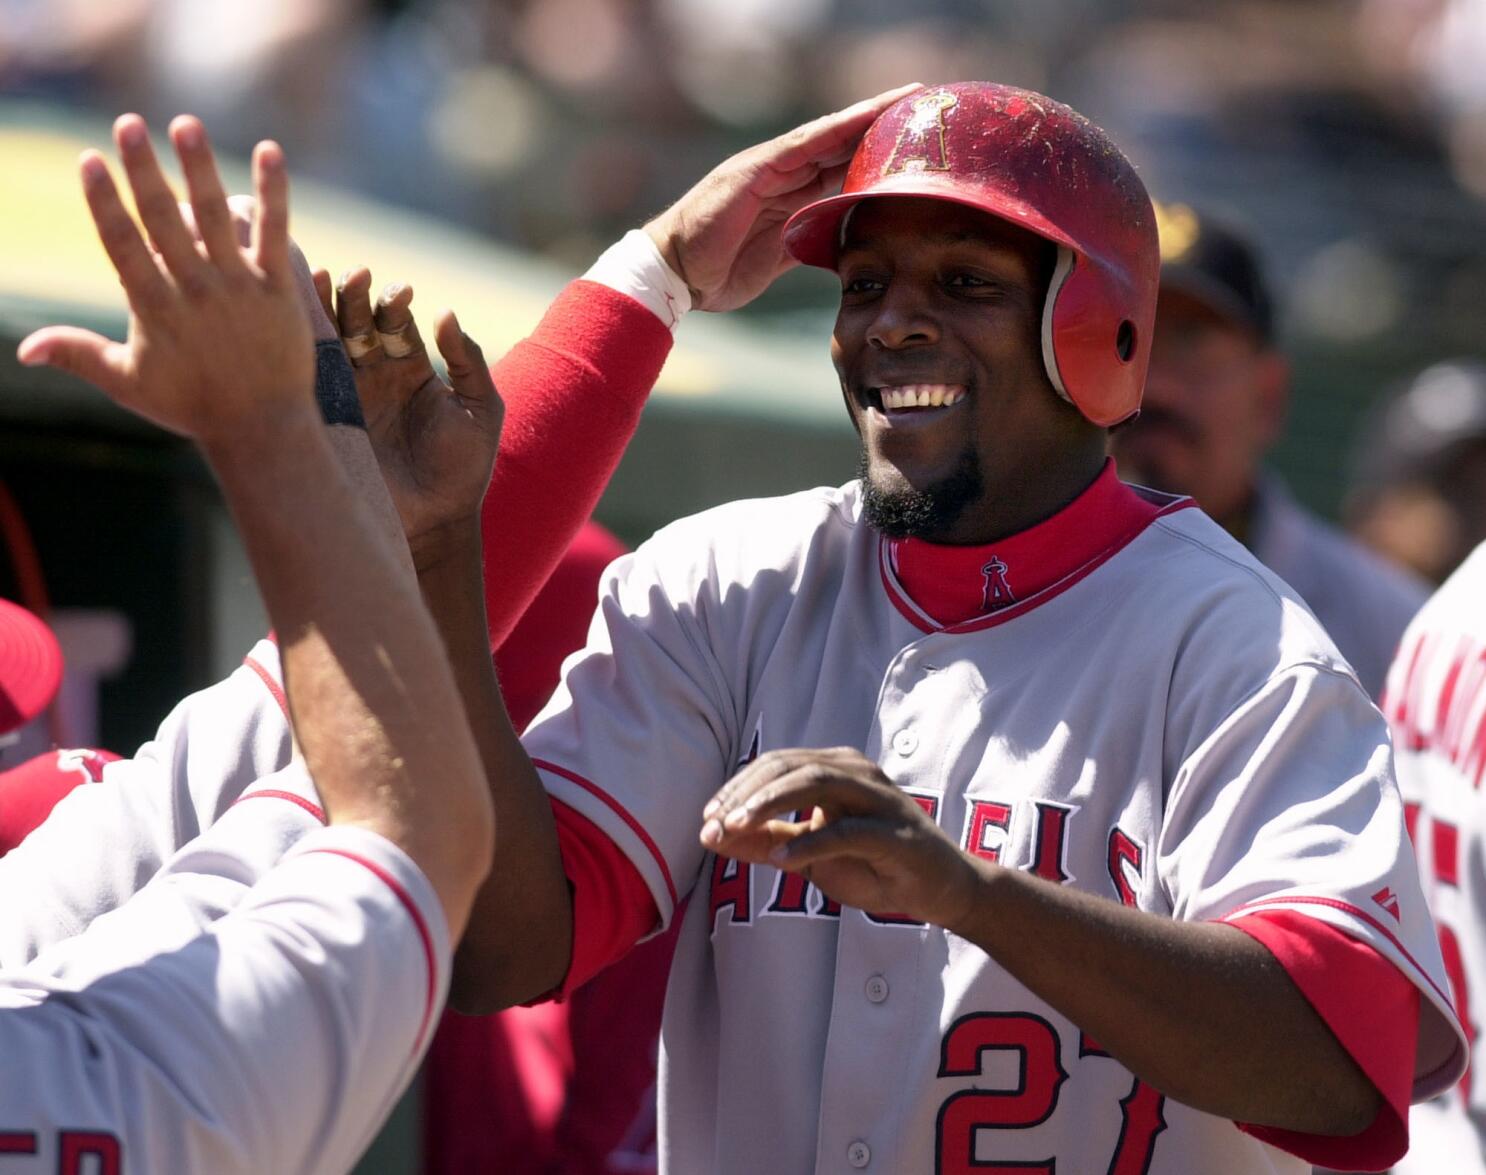 Vladimir Guerrerro to Be 1st Player to Wear Angels Cap in Baseball